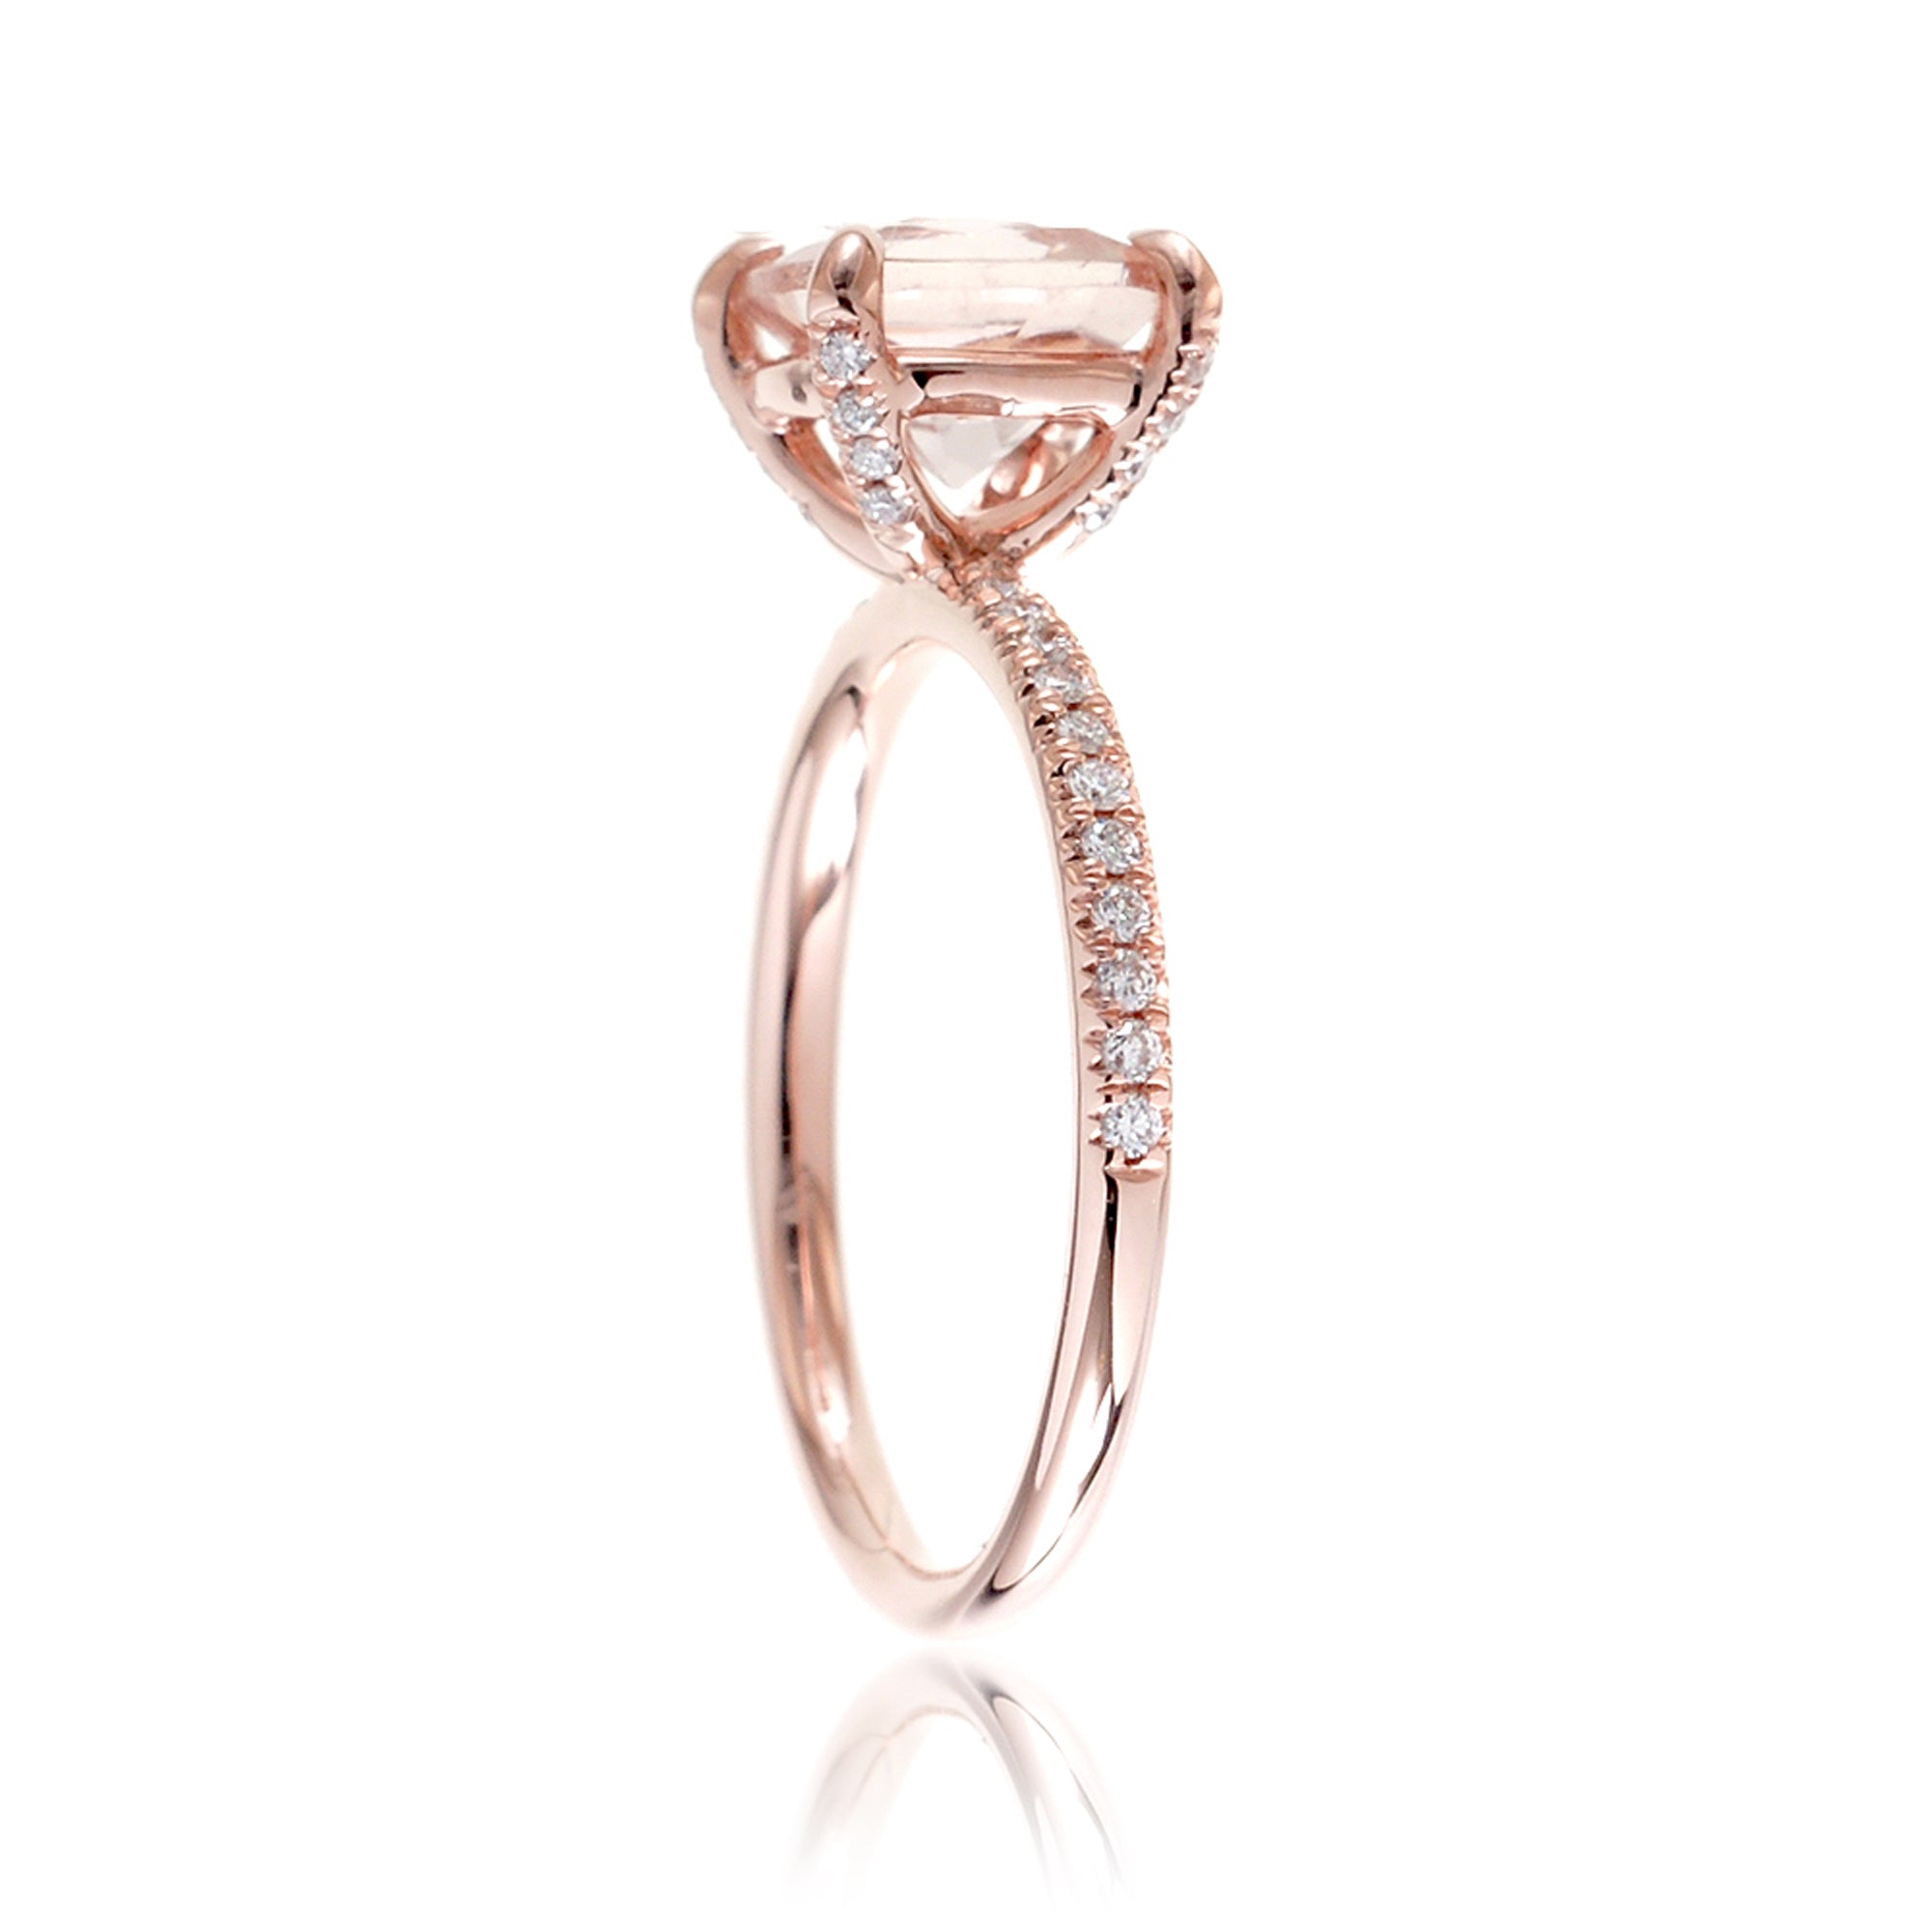 Square cushion morganite diamond band ring in rose gold - The Ava